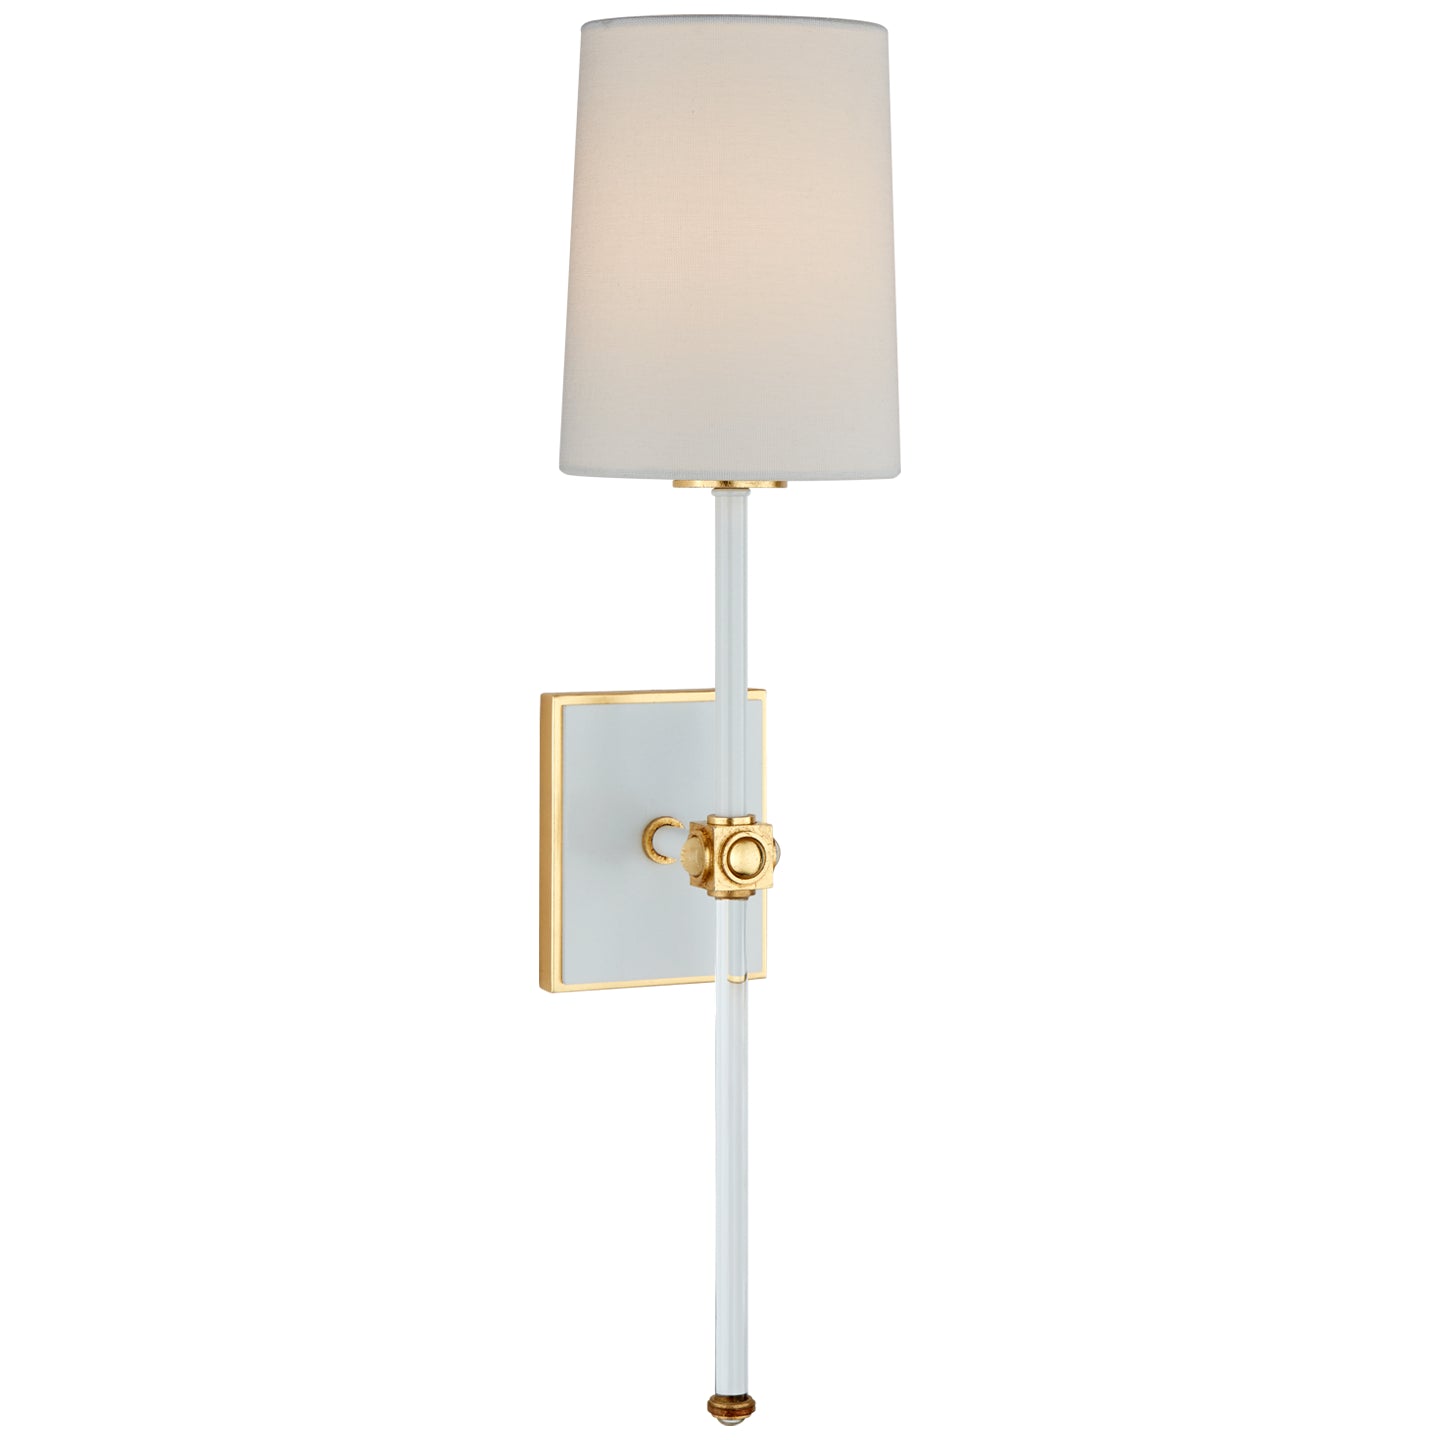 Load image into Gallery viewer, Visual Comfort Signature - JN 2051WHT/CG-L - One Light Wall Sconce - Lucia - White and Crystal
